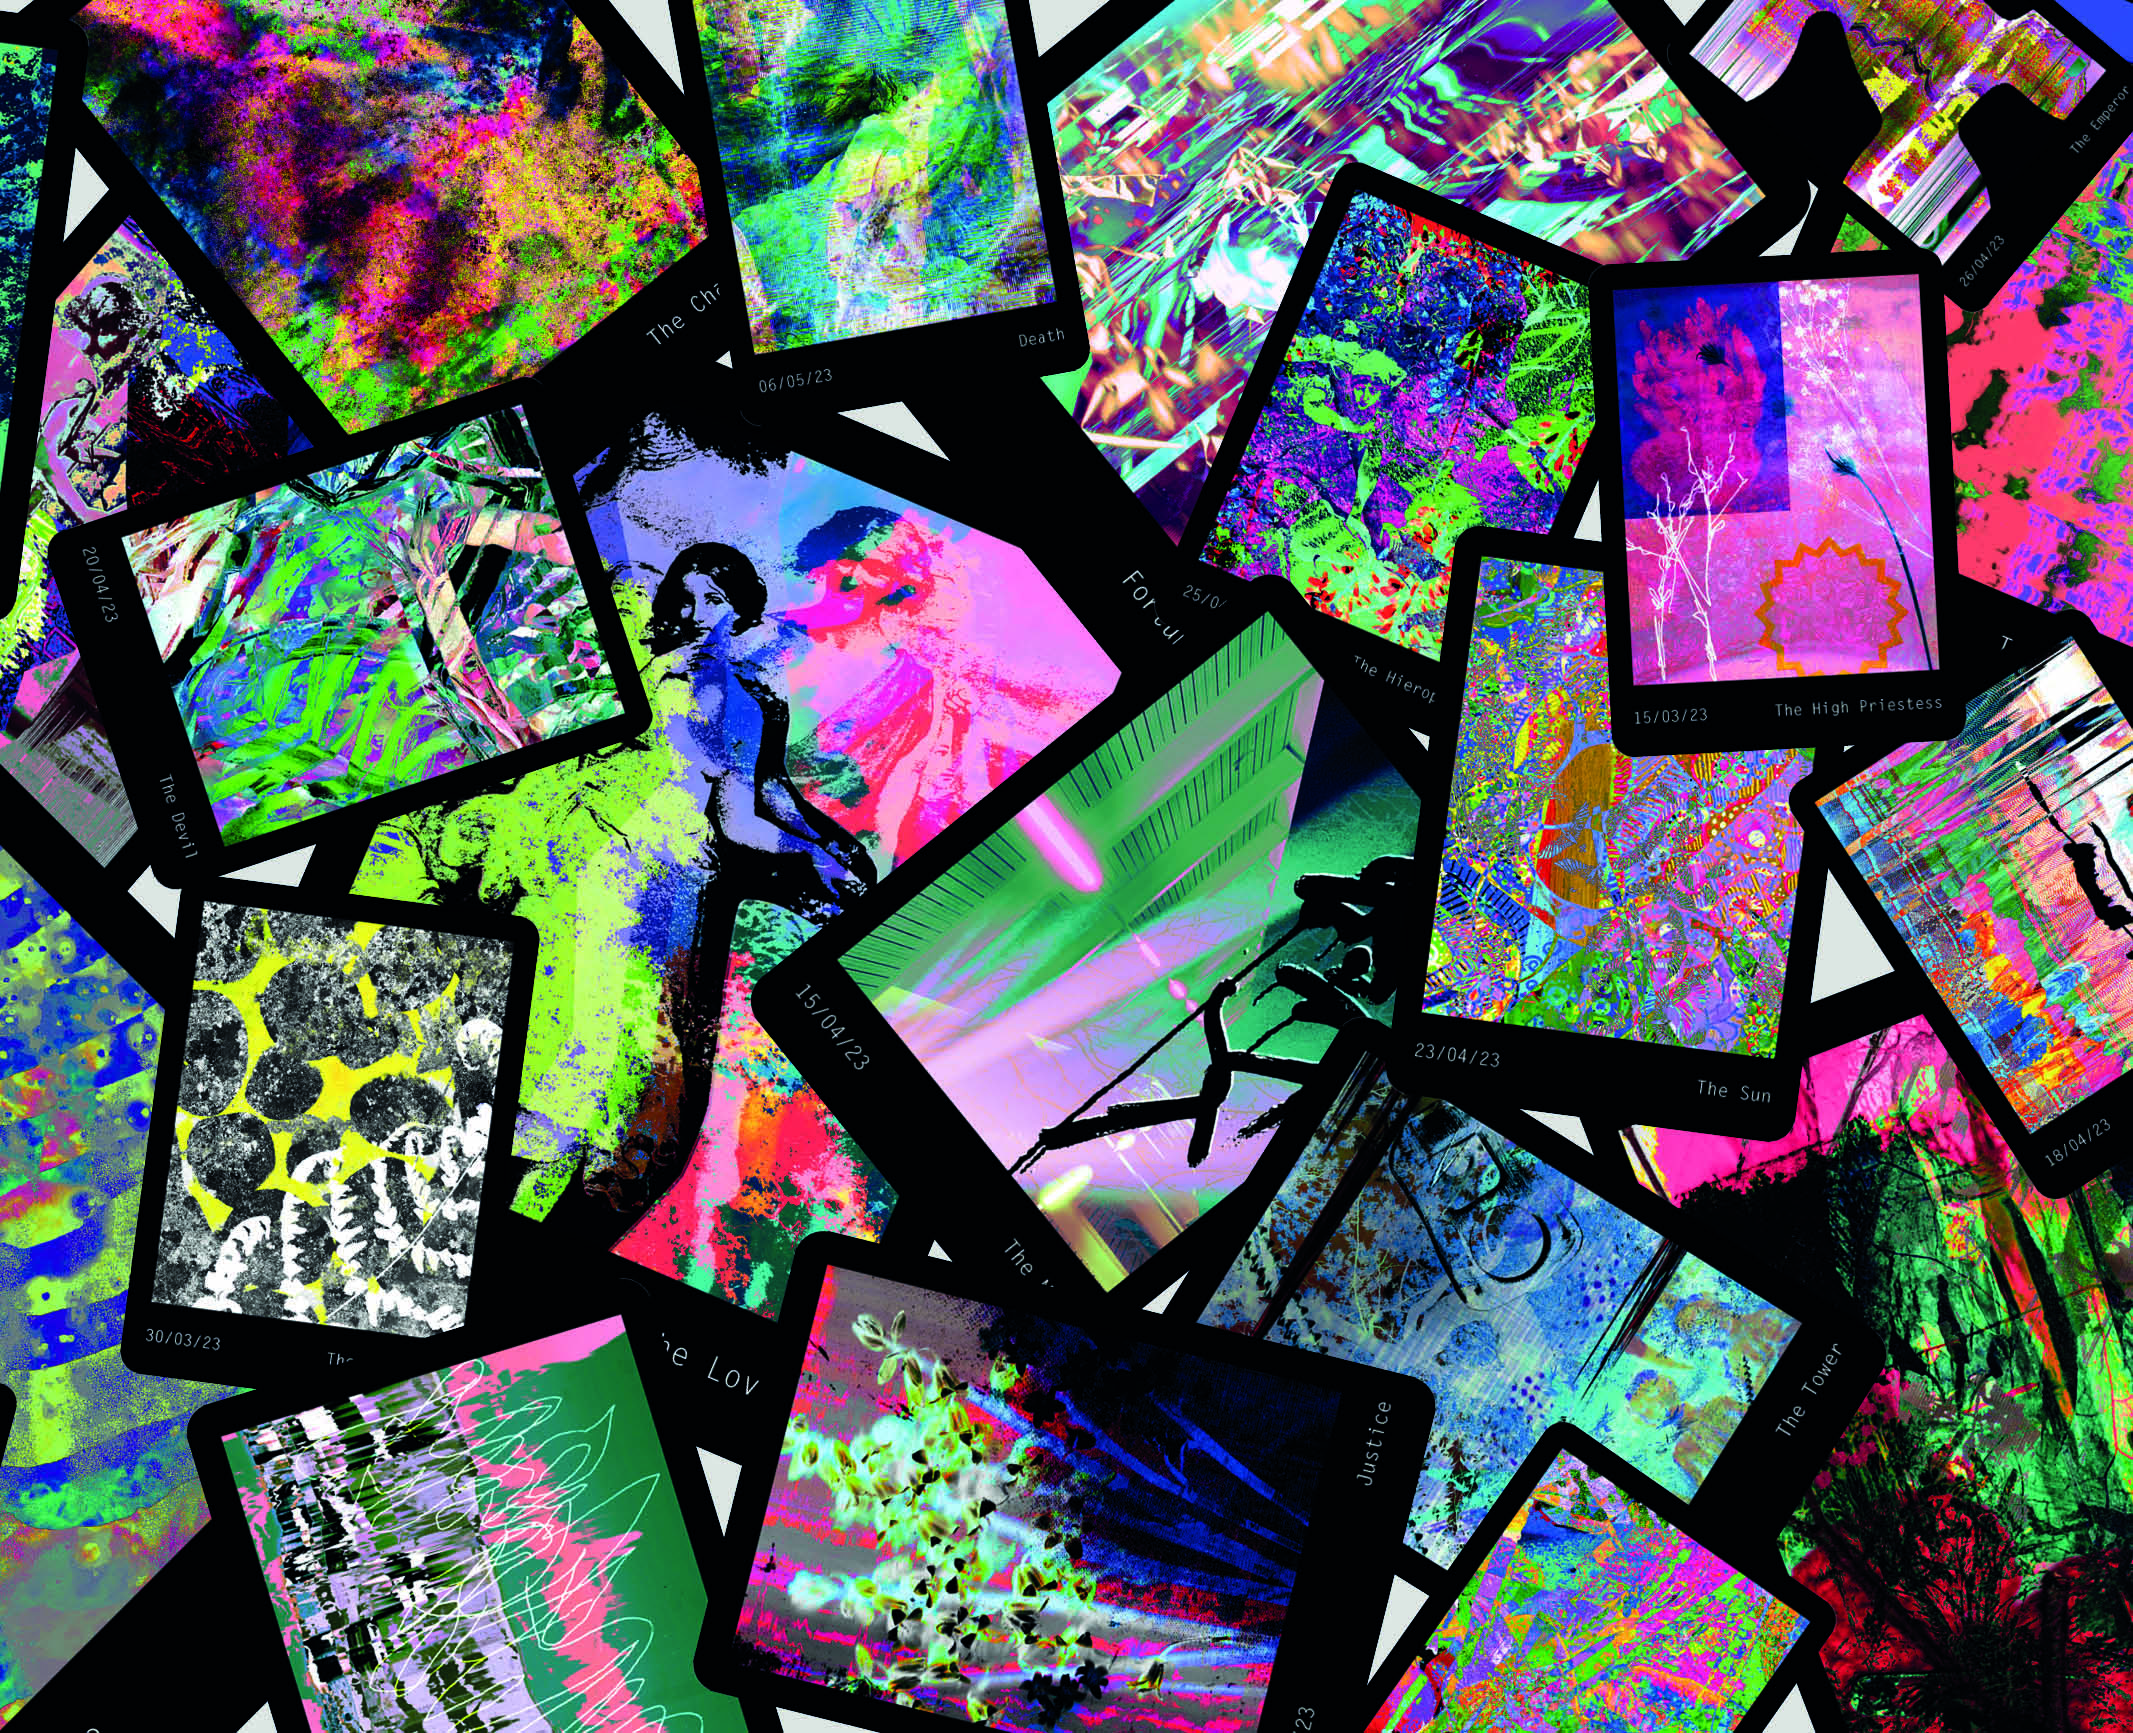 A set of 22 tarot cards designed by Imogen Allen showing digital, abstract layered images.